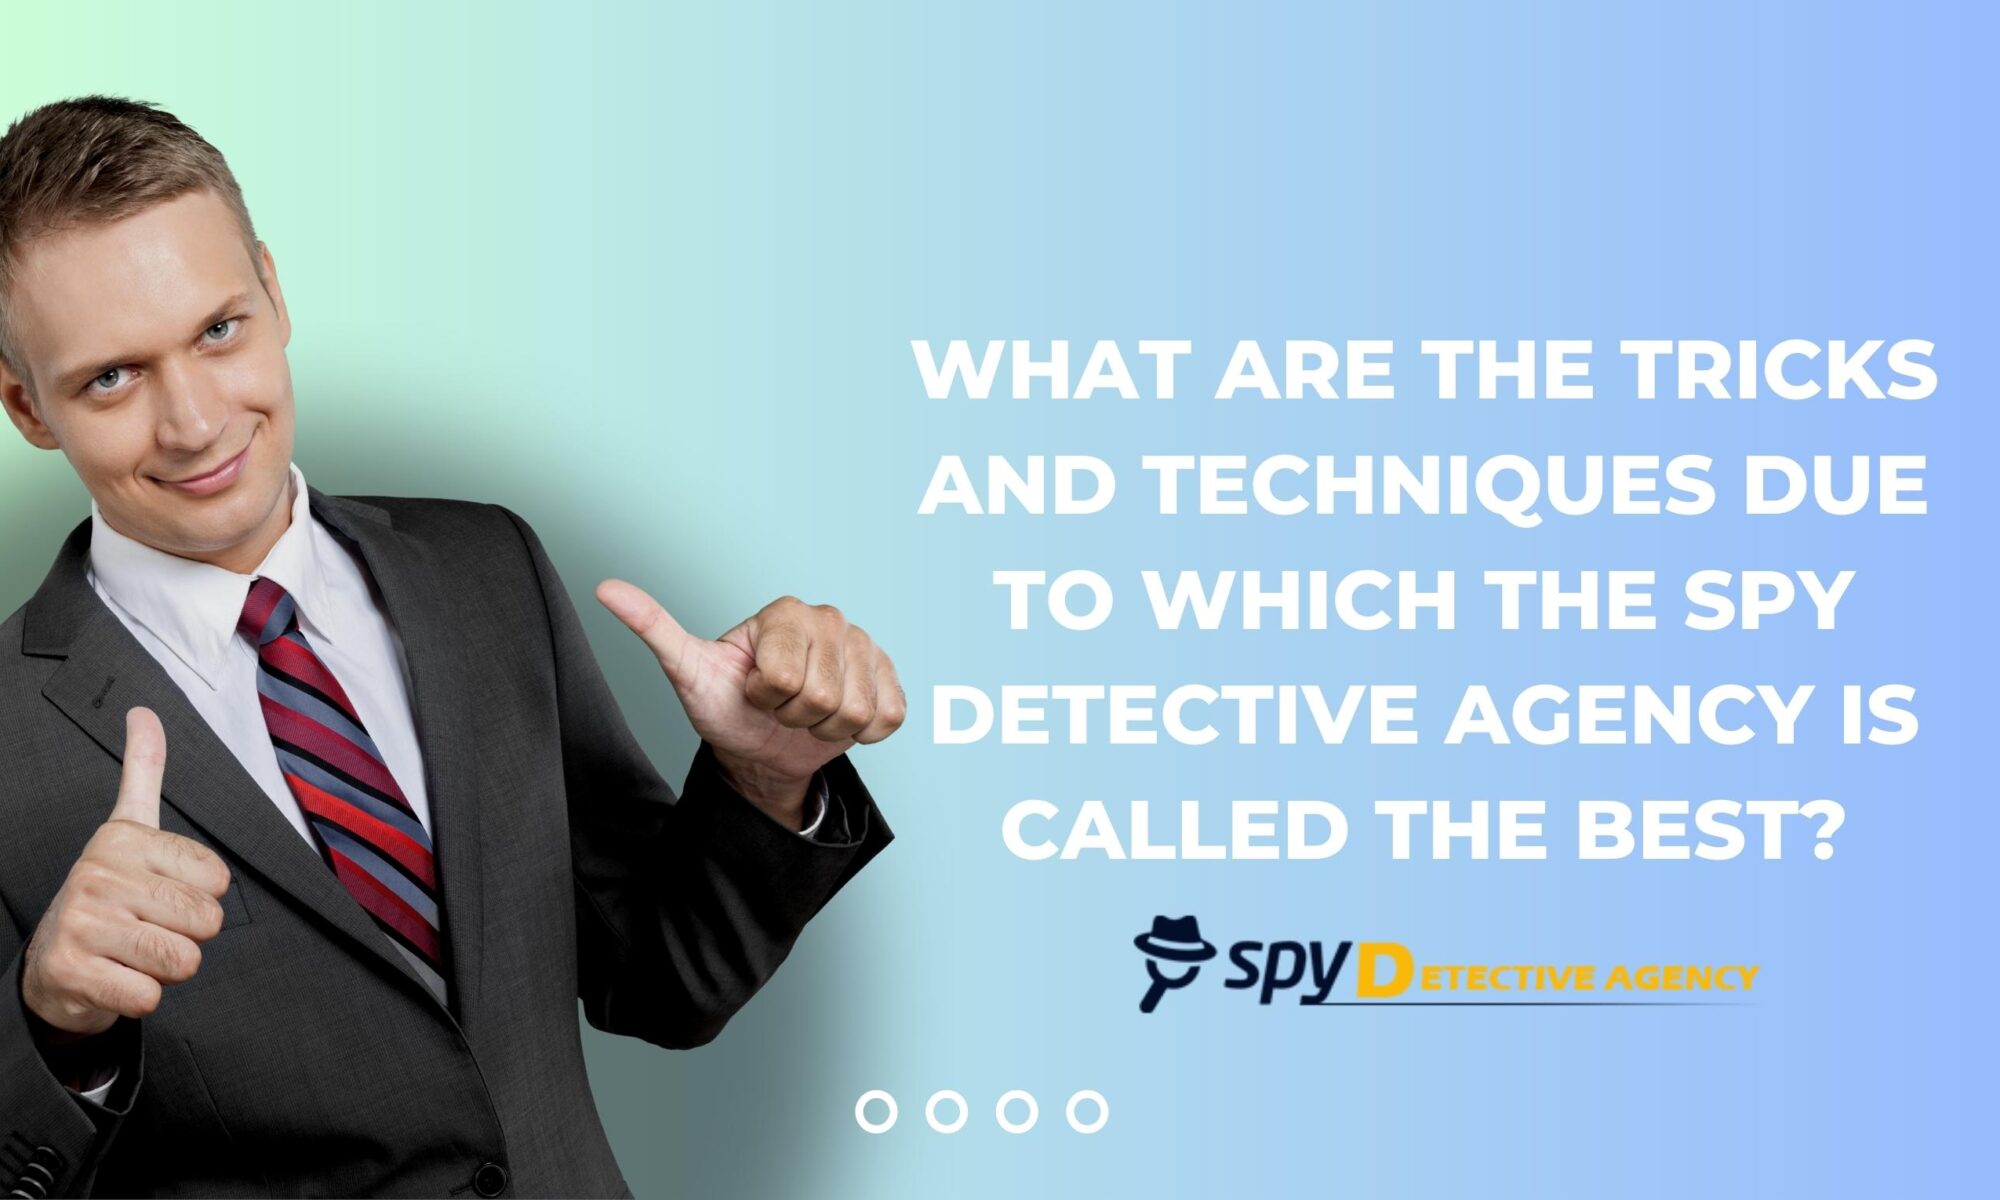 What are the tricks and techniques due to which the Spy Detective Agency is the best